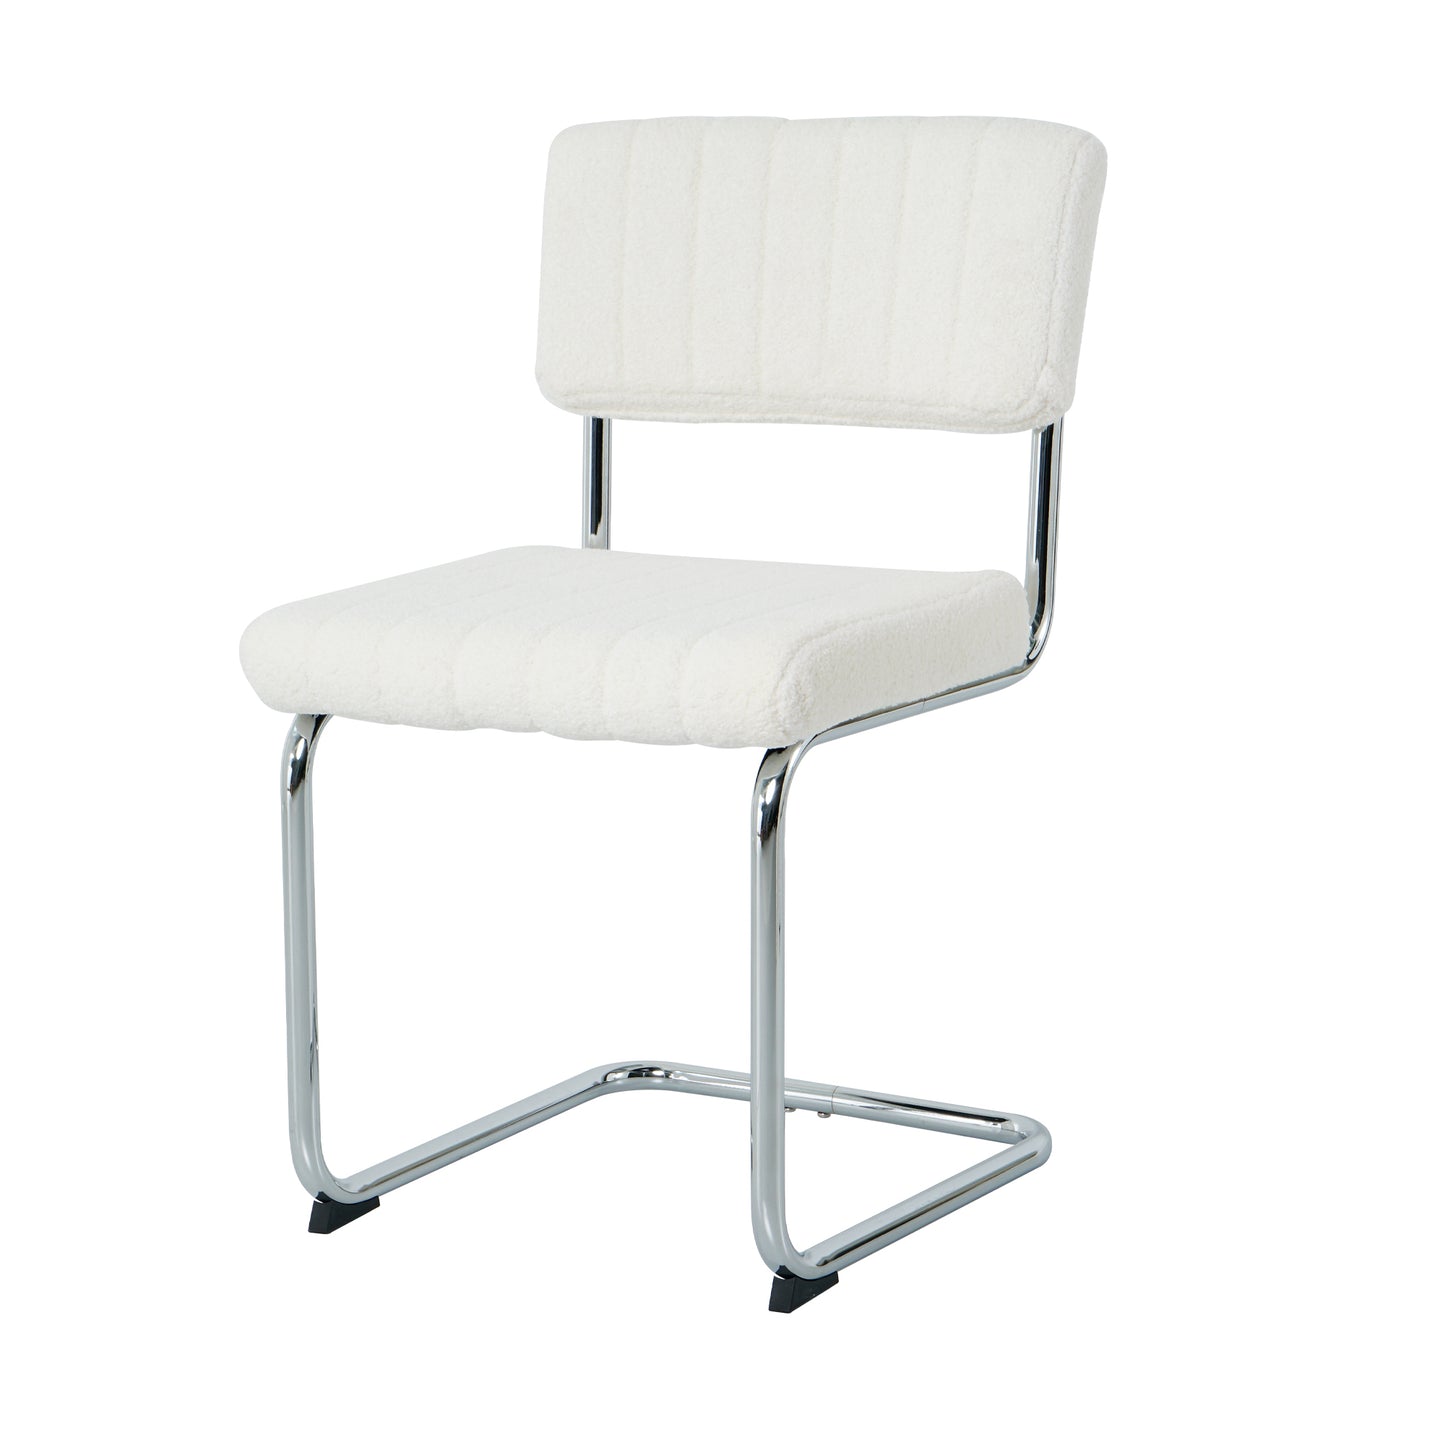 Modern Luxury Dining Chair Set of 4 (white/gray)